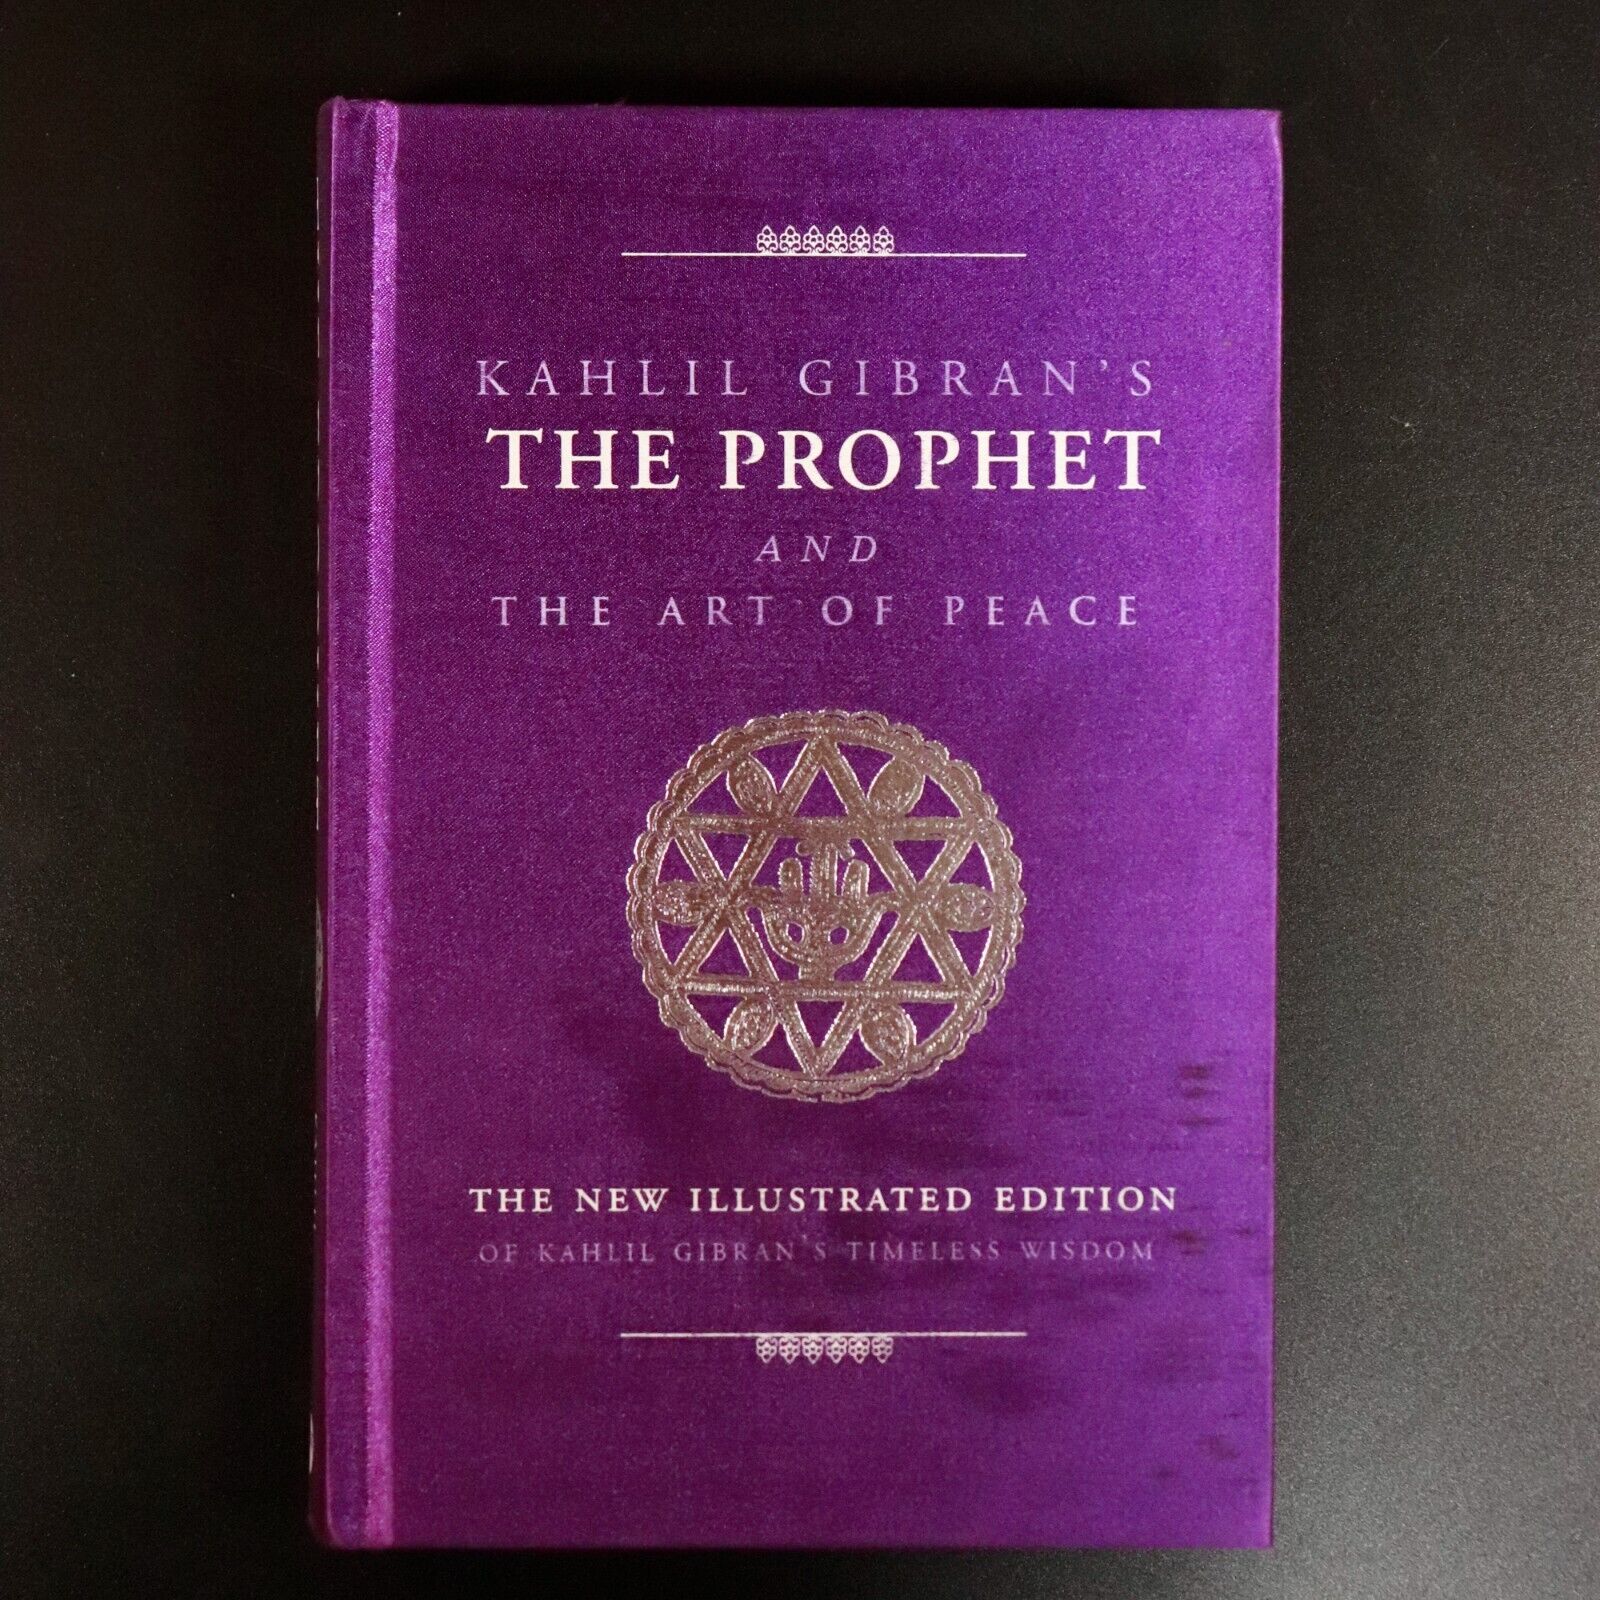 2008 The Prophet & The Art Of Peace by Kahlil Gibran Illustrated Philosophy Book